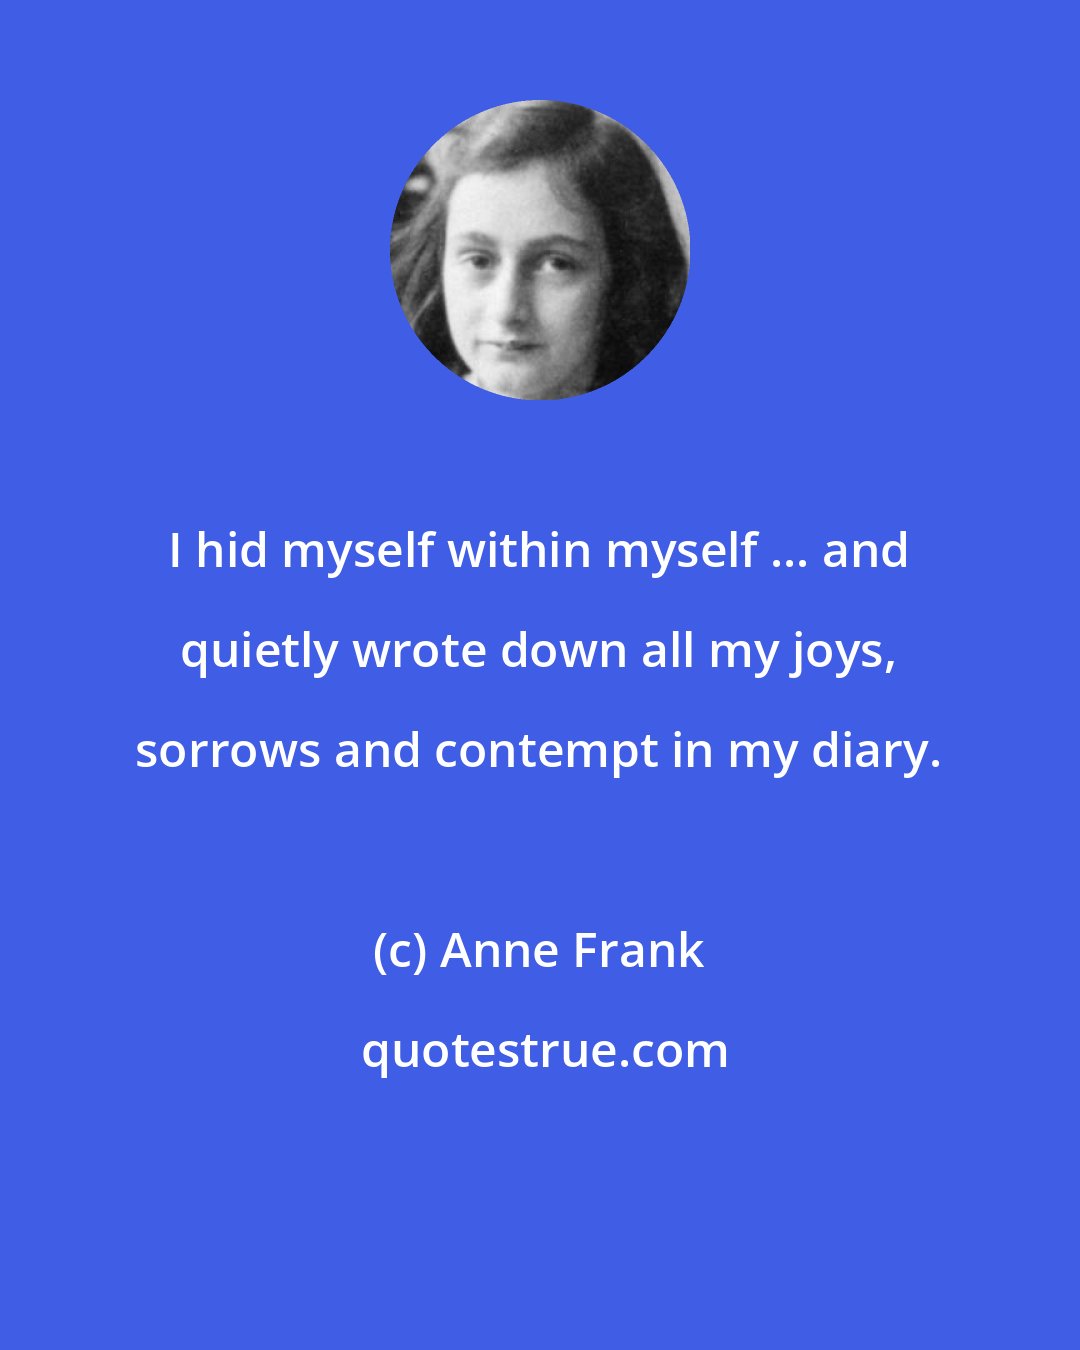 Anne Frank: I hid myself within myself ... and quietly wrote down all my joys, sorrows and contempt in my diary.